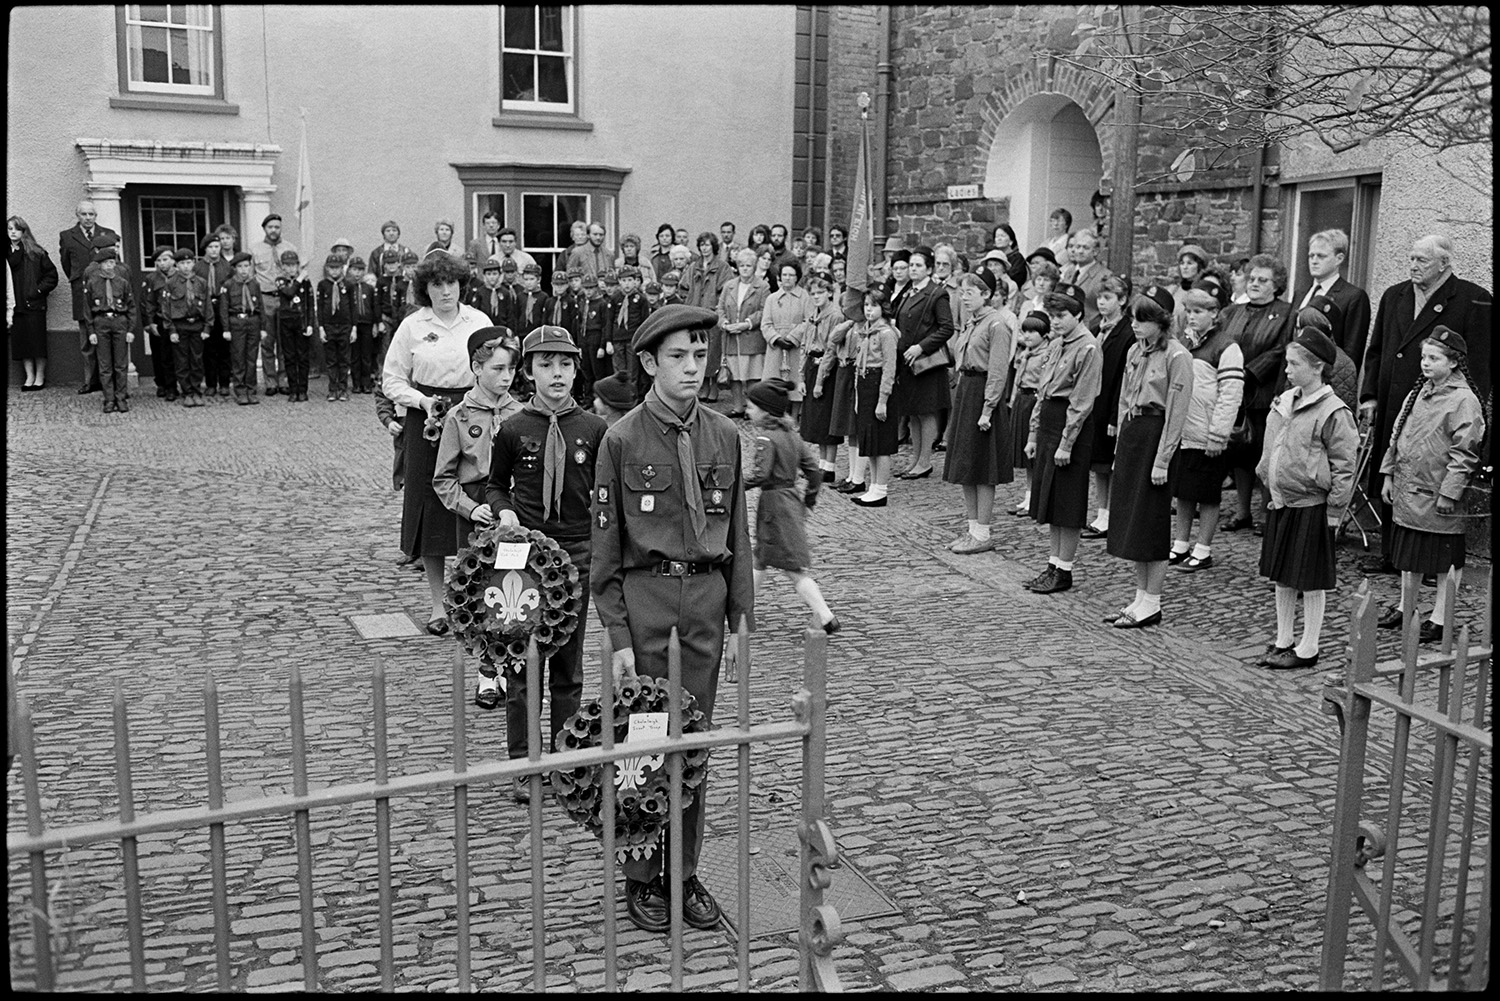 Parade at Memorial, laying wreaths by men, women and scouts. Vicar saying prayers.
[People assembling for the Remembrance Sunday wreath laying ceremony at the war memorial in the cobbled square at Chulmleigh. There are groups of Girl Guides and Scouts. Two Scouts are carrying poppy wreaths to the war memorial.]